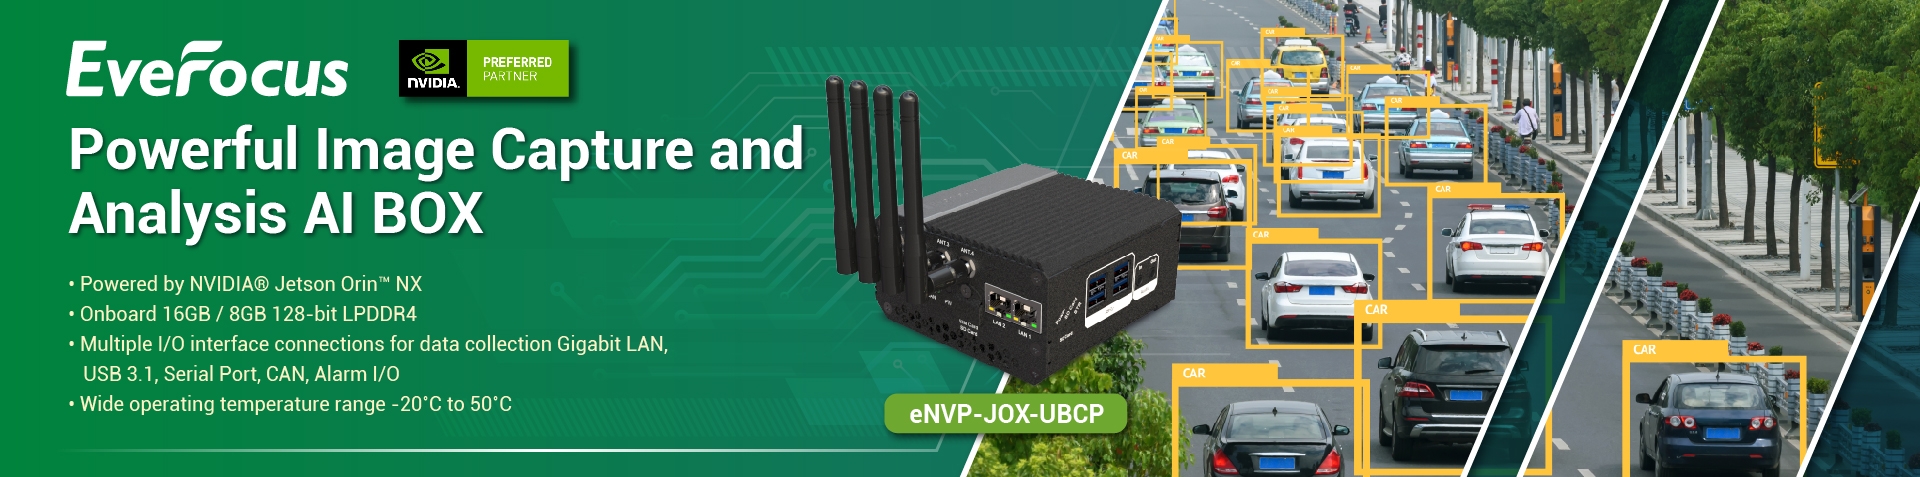 EverFocus Presents the eNVP-JOX-UBCP, a High-Performance AI Image Capture and Analysis Box